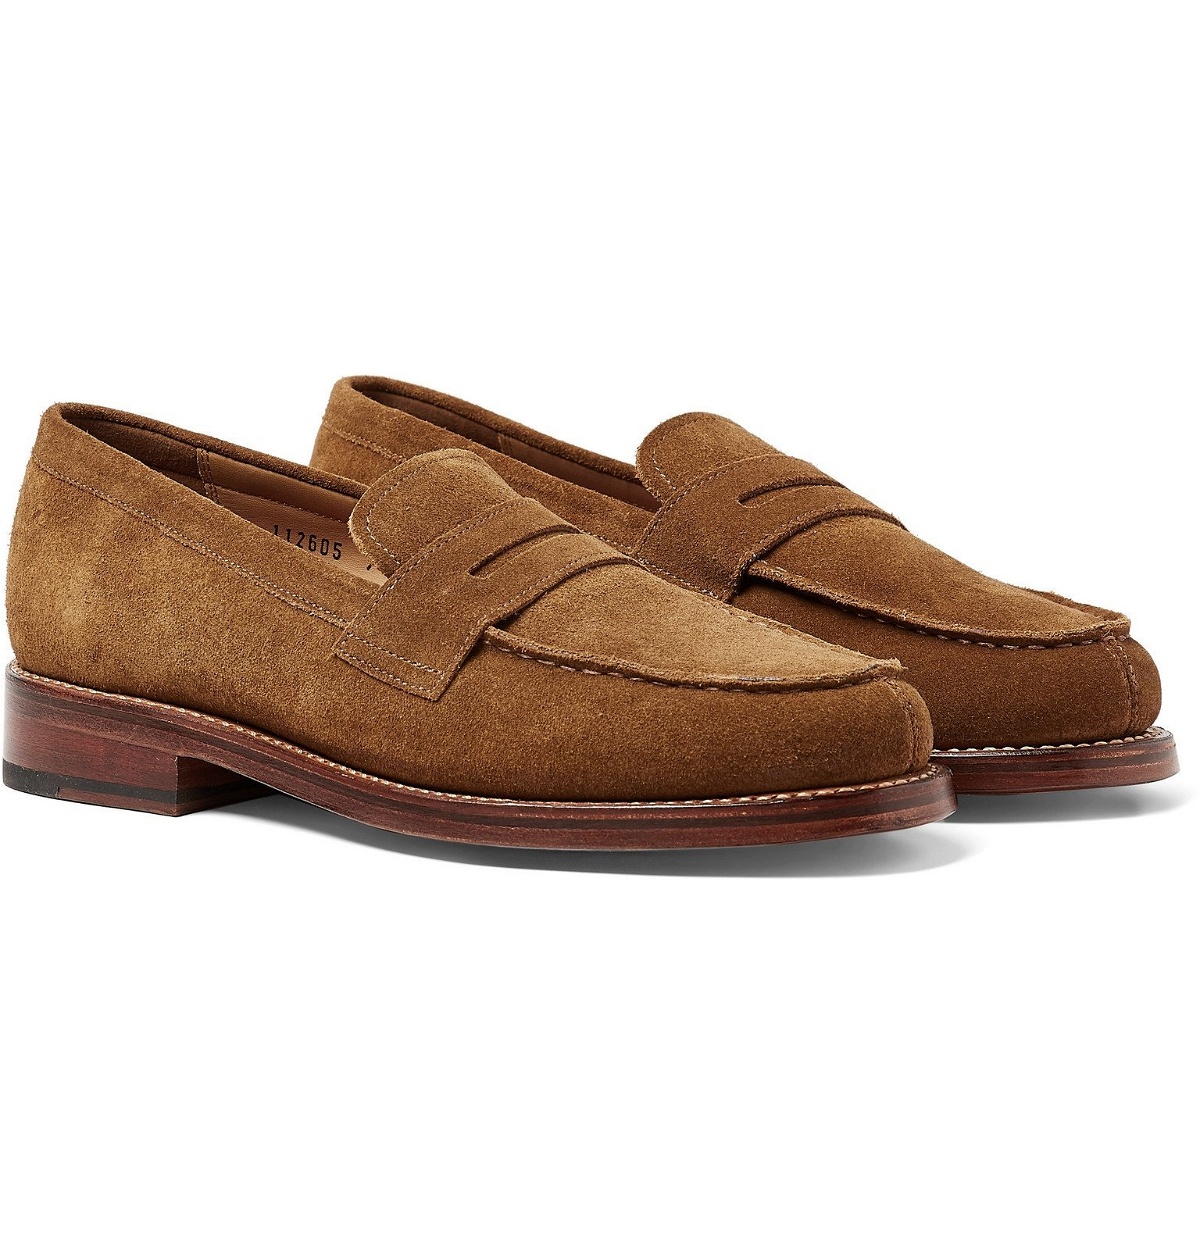 Grenson - Peter Brushed-Suede Penny Loafers - Brown Grenson